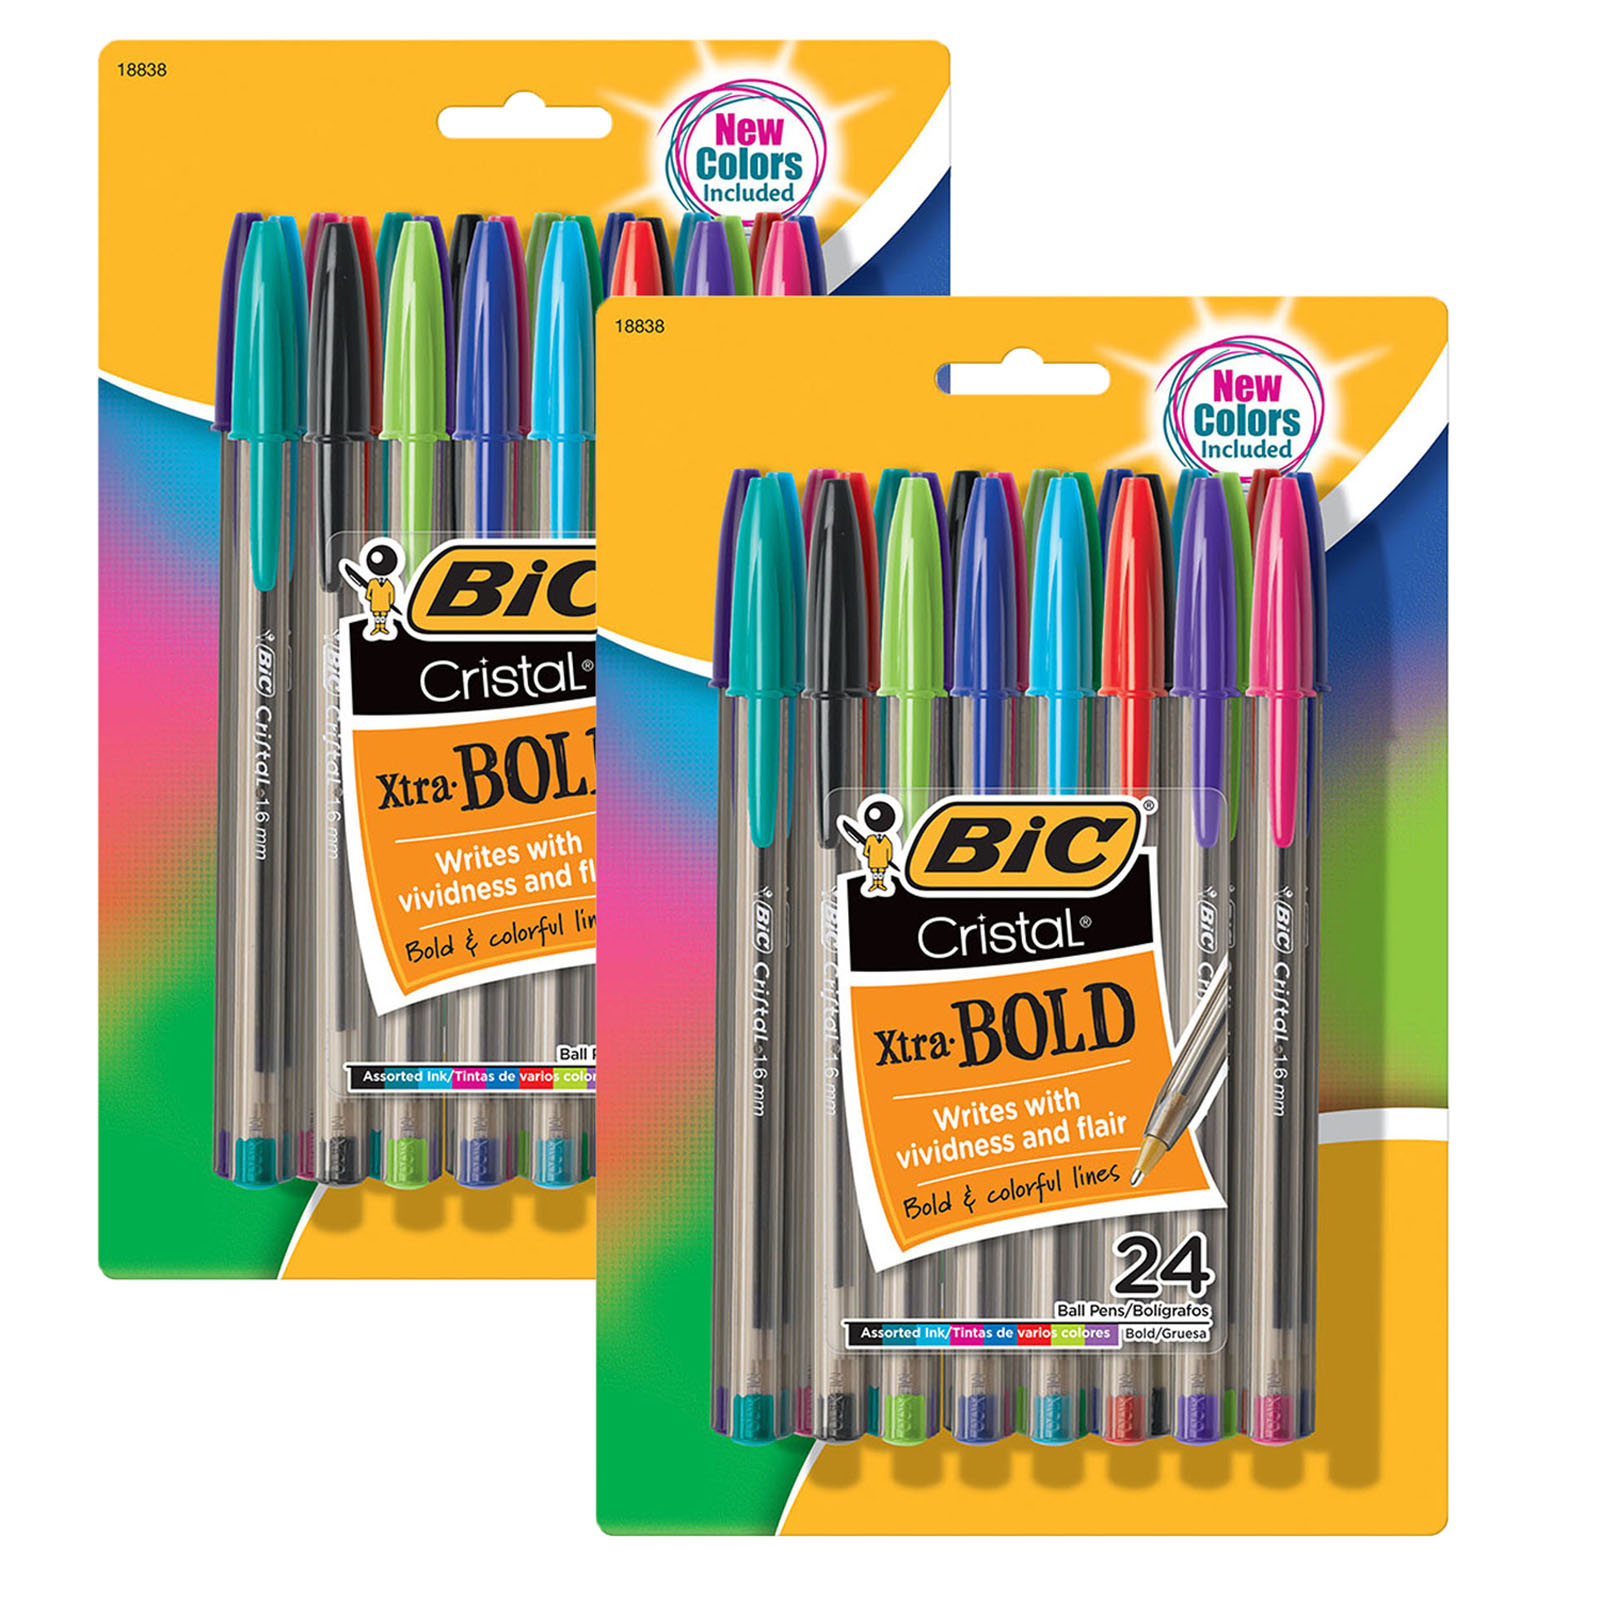 Cristal Xtra Bold Fashion Ballpoint Pen, Medium Point (1.6mm), Assorted Colors, 24 Per Pack, 2 Packs